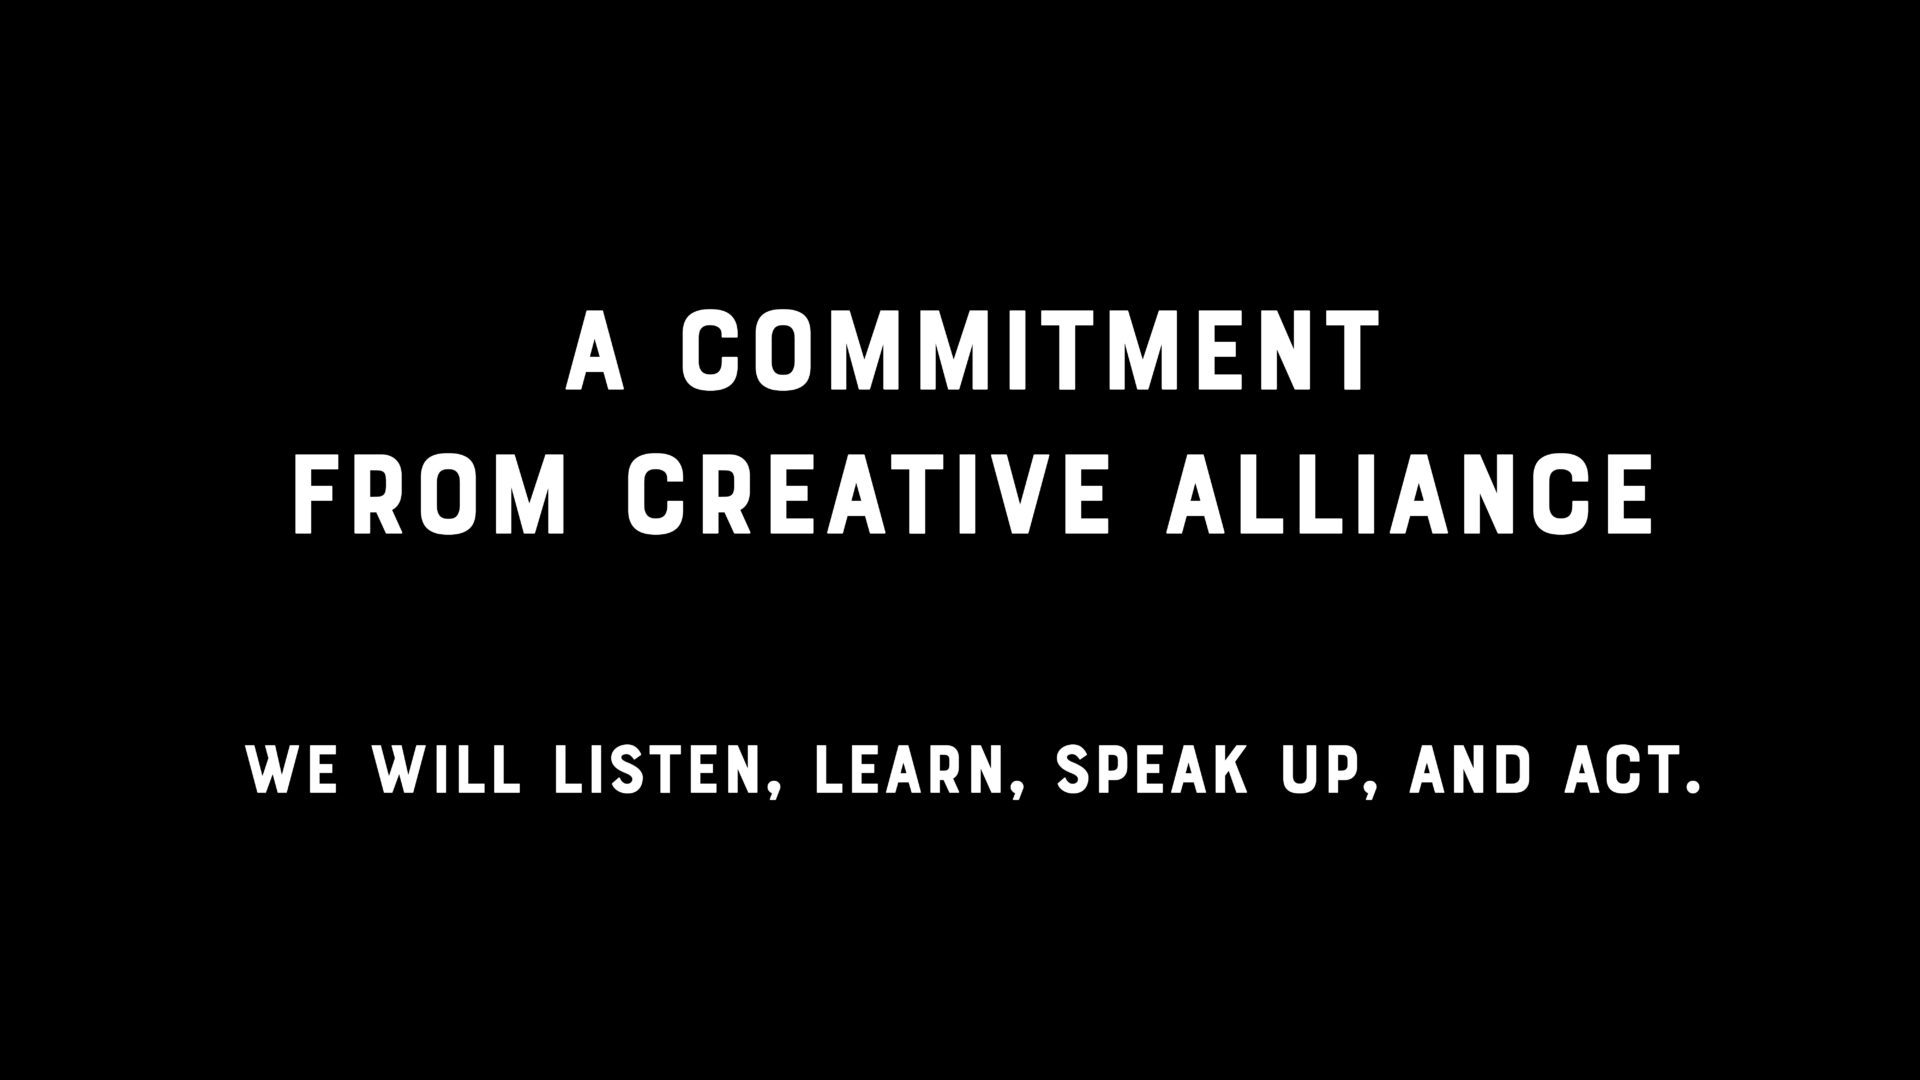 Creative Alliance | A commitment from creative alliance